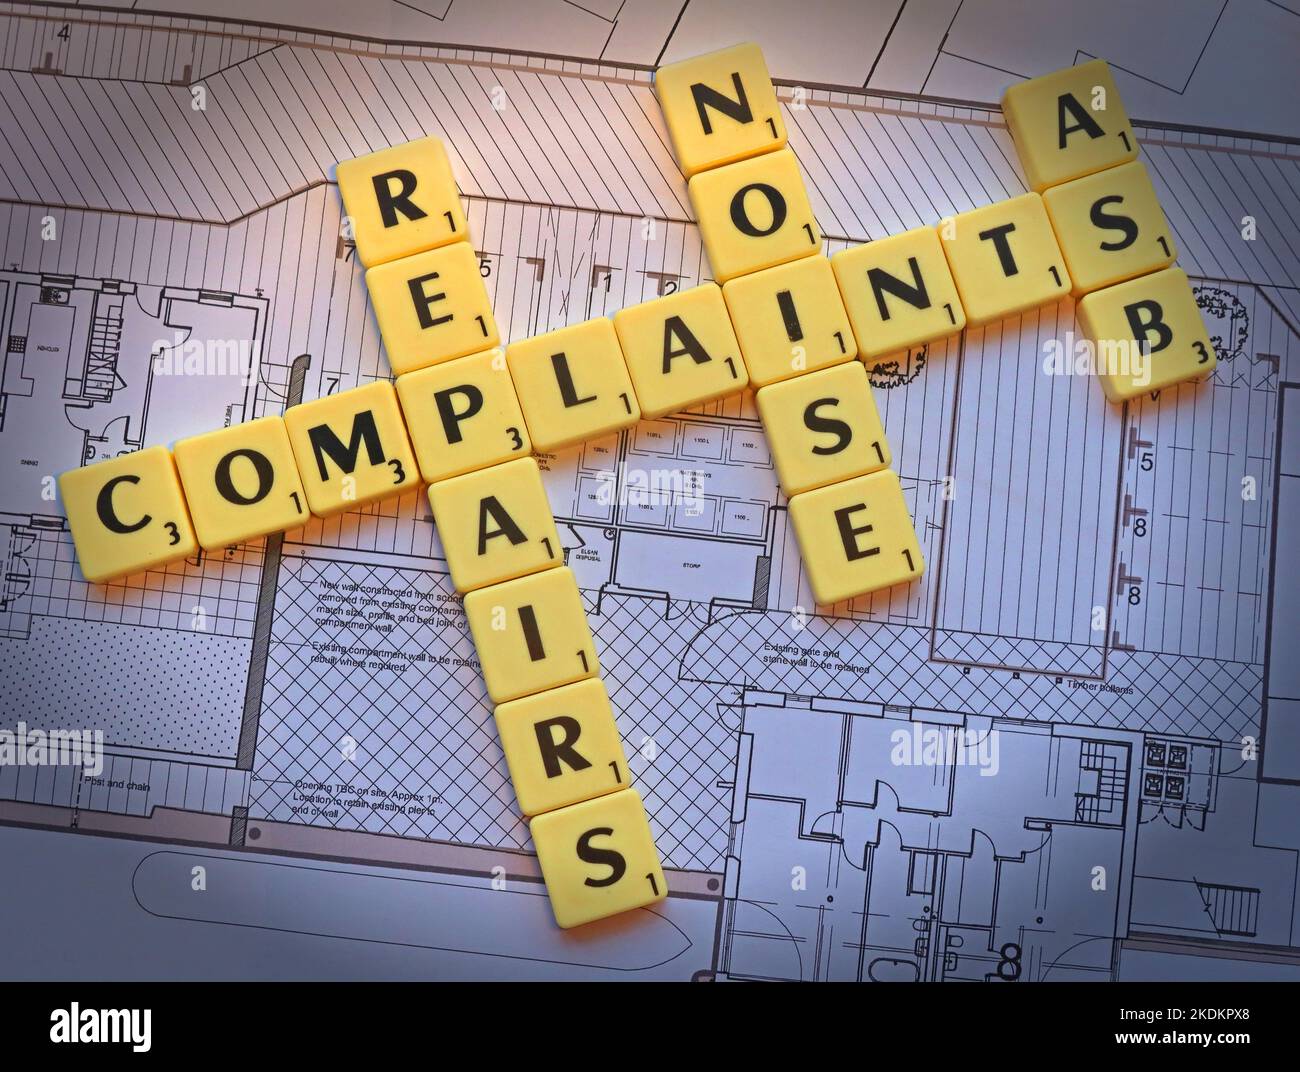 All types of complaint - Repairs,ASB, Noise - Scrabble letters on plans for a housing scheme - Property Issues Stock Photo